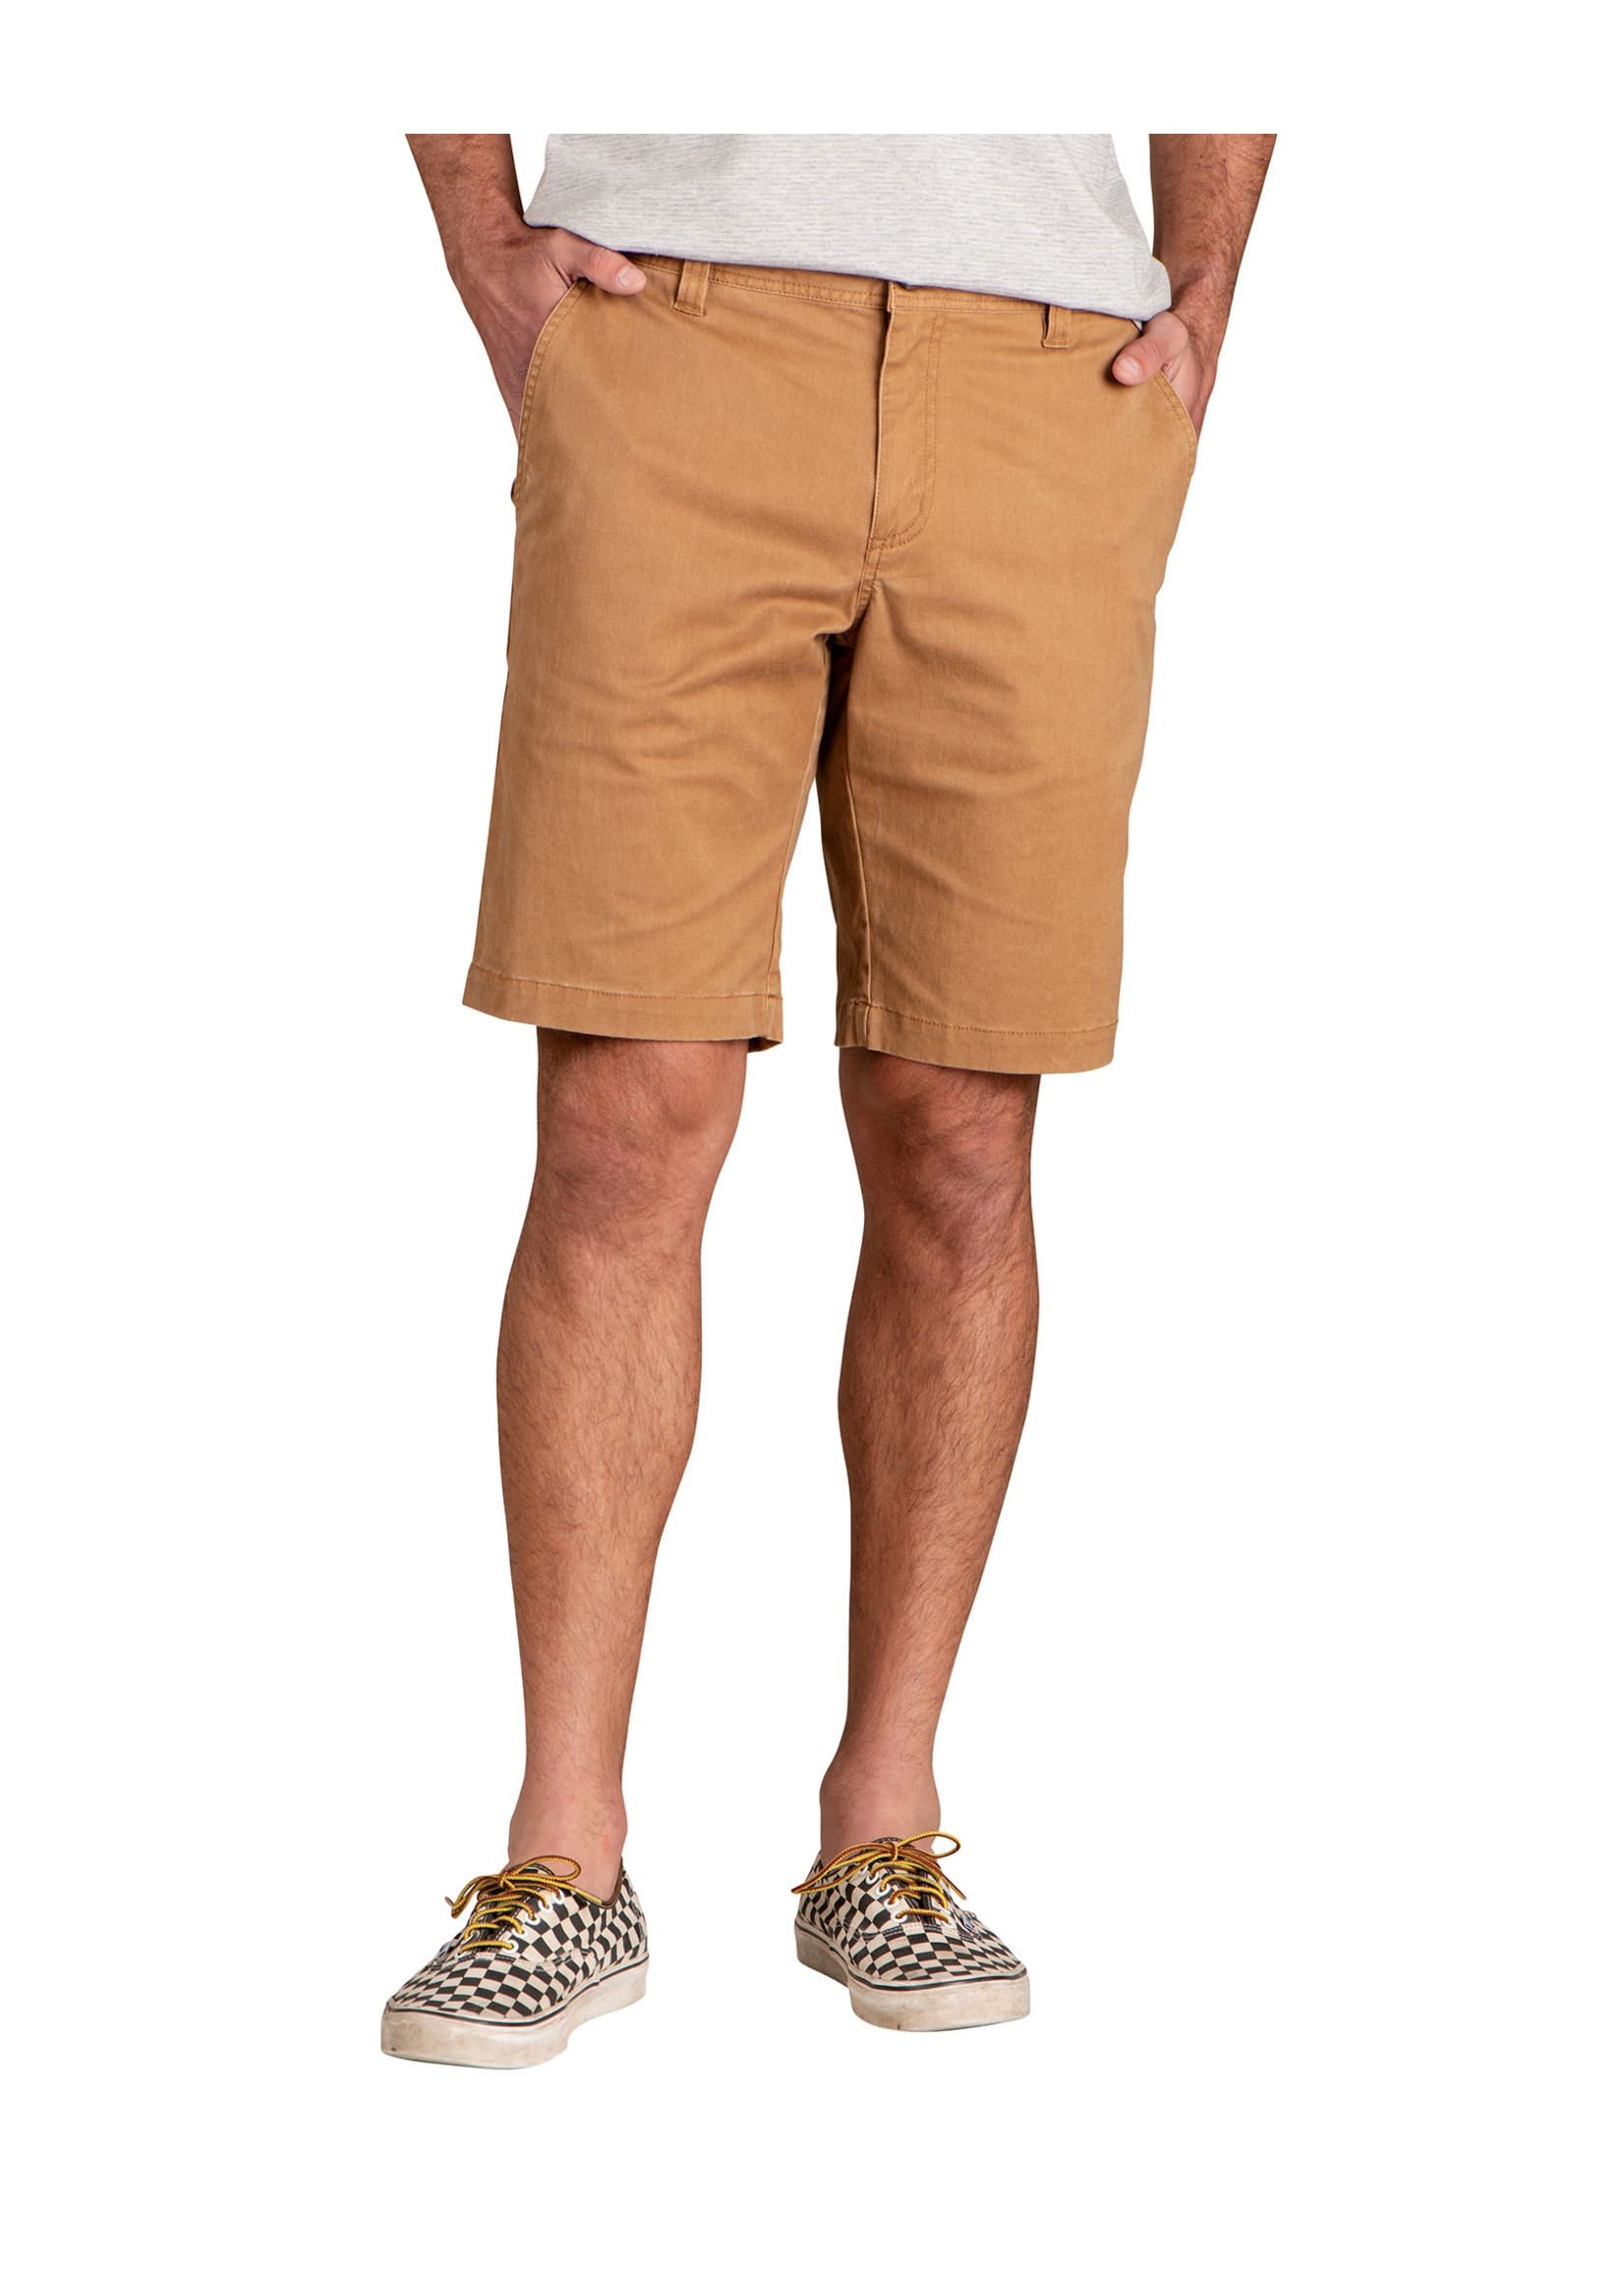 TOAD & CO Short Mission Ridge (Homme)